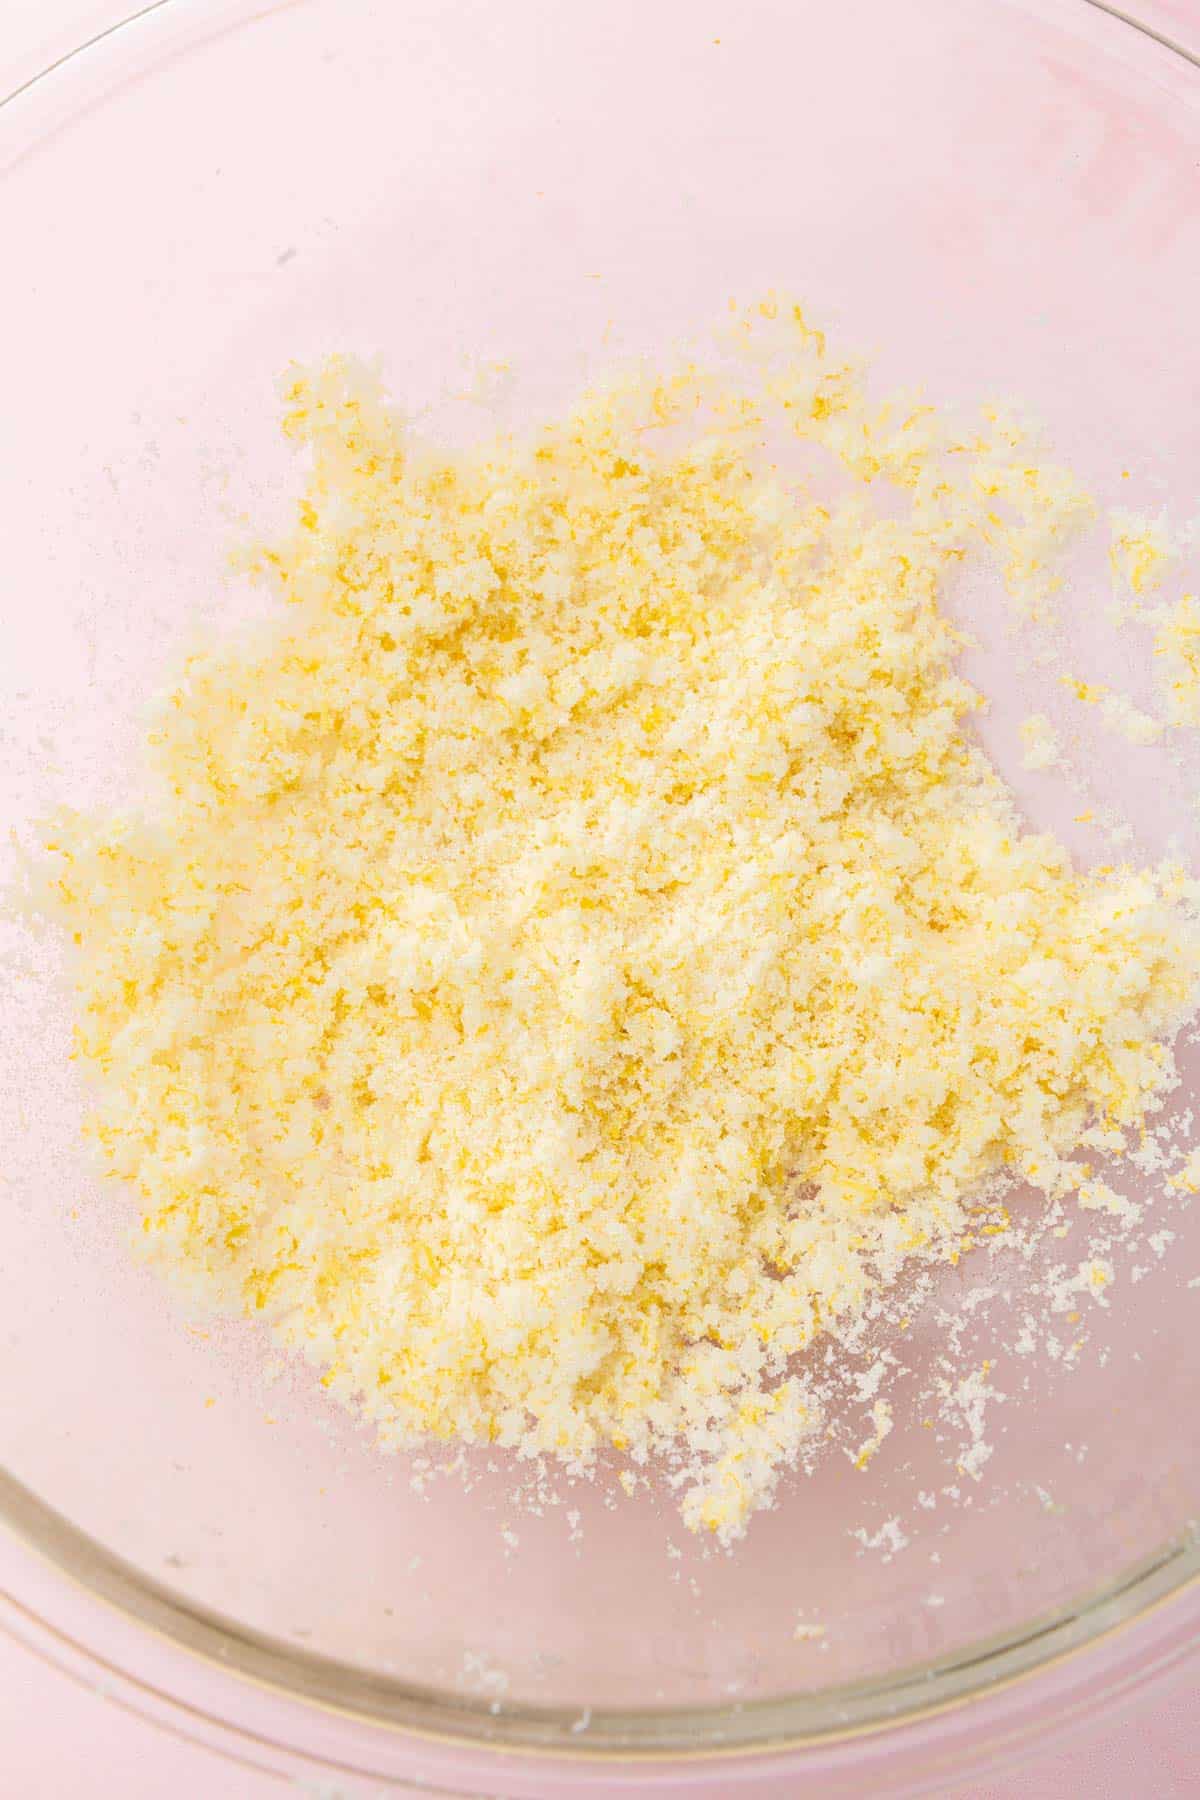 A glass mixing bowl with a granulated sugar and lemon zest mixture that has been mixed together.